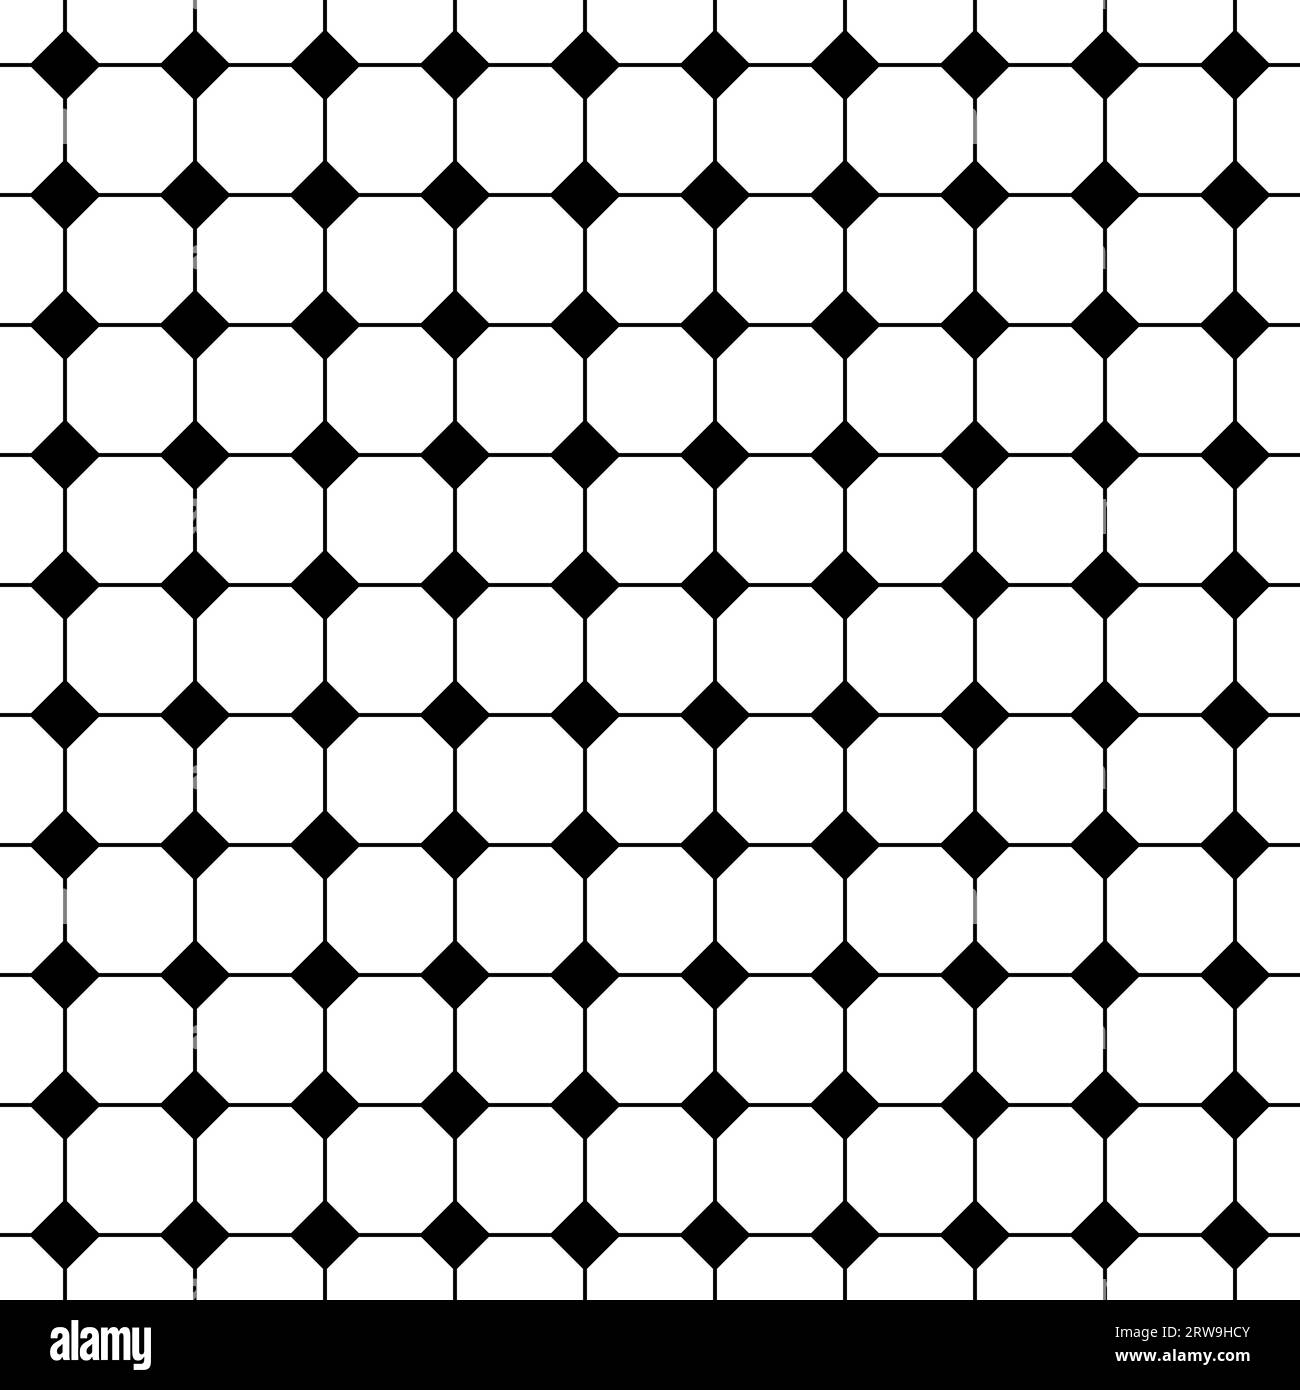 Vintage wall ceramic tiled seamless pattern. Black and white chequerwise squares background. Simple wall ceramic tiles. Kitchen or bathroom mosaic Stock Vector